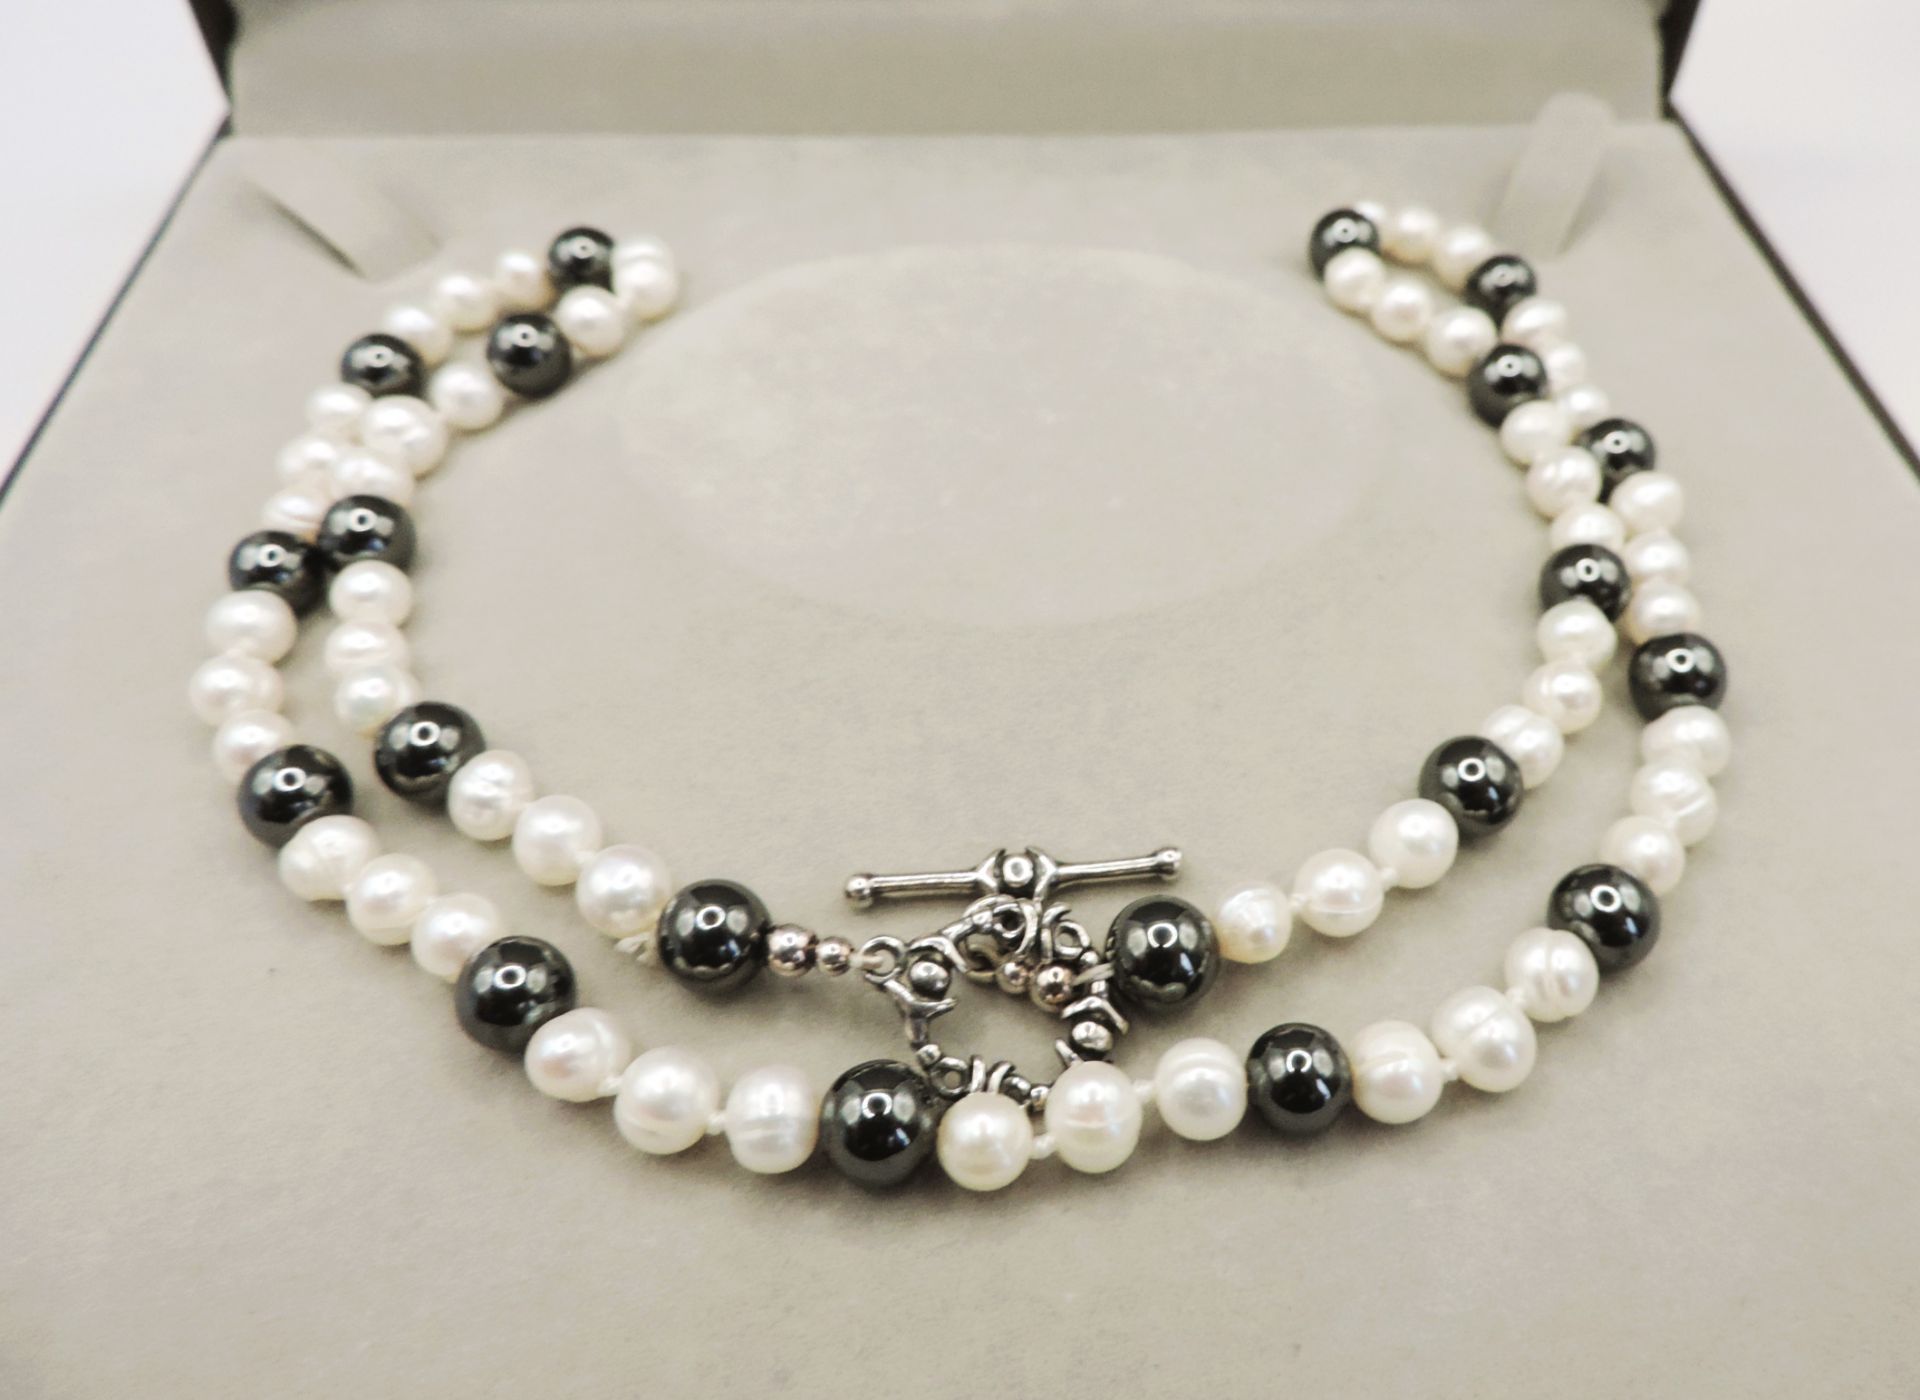 22 Inch Cultured Pearl & Hematite Bead Necklace Silver Clasp New with Gift Box - Image 3 of 5